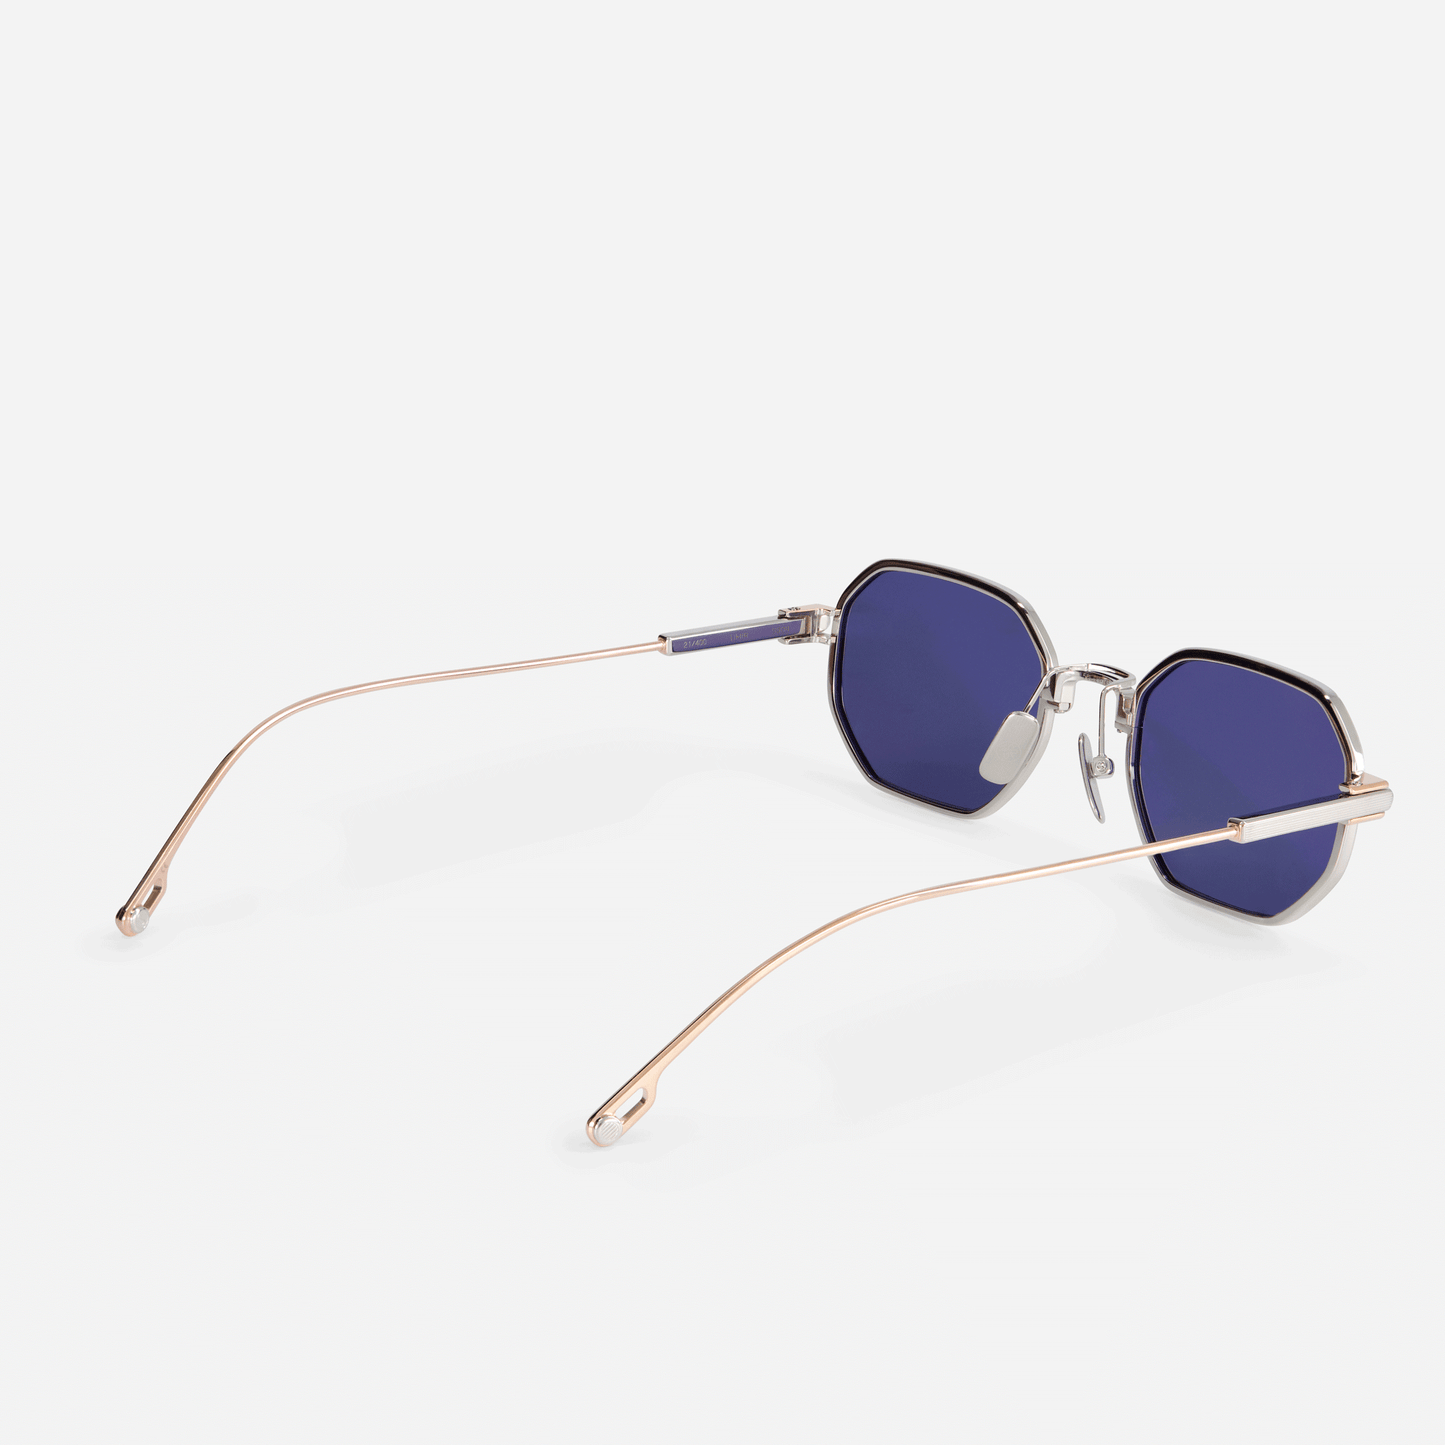  Timir S504 hexagonal glasses, a highlight from the latest Sato SS23 collection. Crafted from premium Japanese titanium in Rose Gold and Platinum, these glasses boast stylish blue-tinted lenses, perfect for men and women with a taste for sophistication.